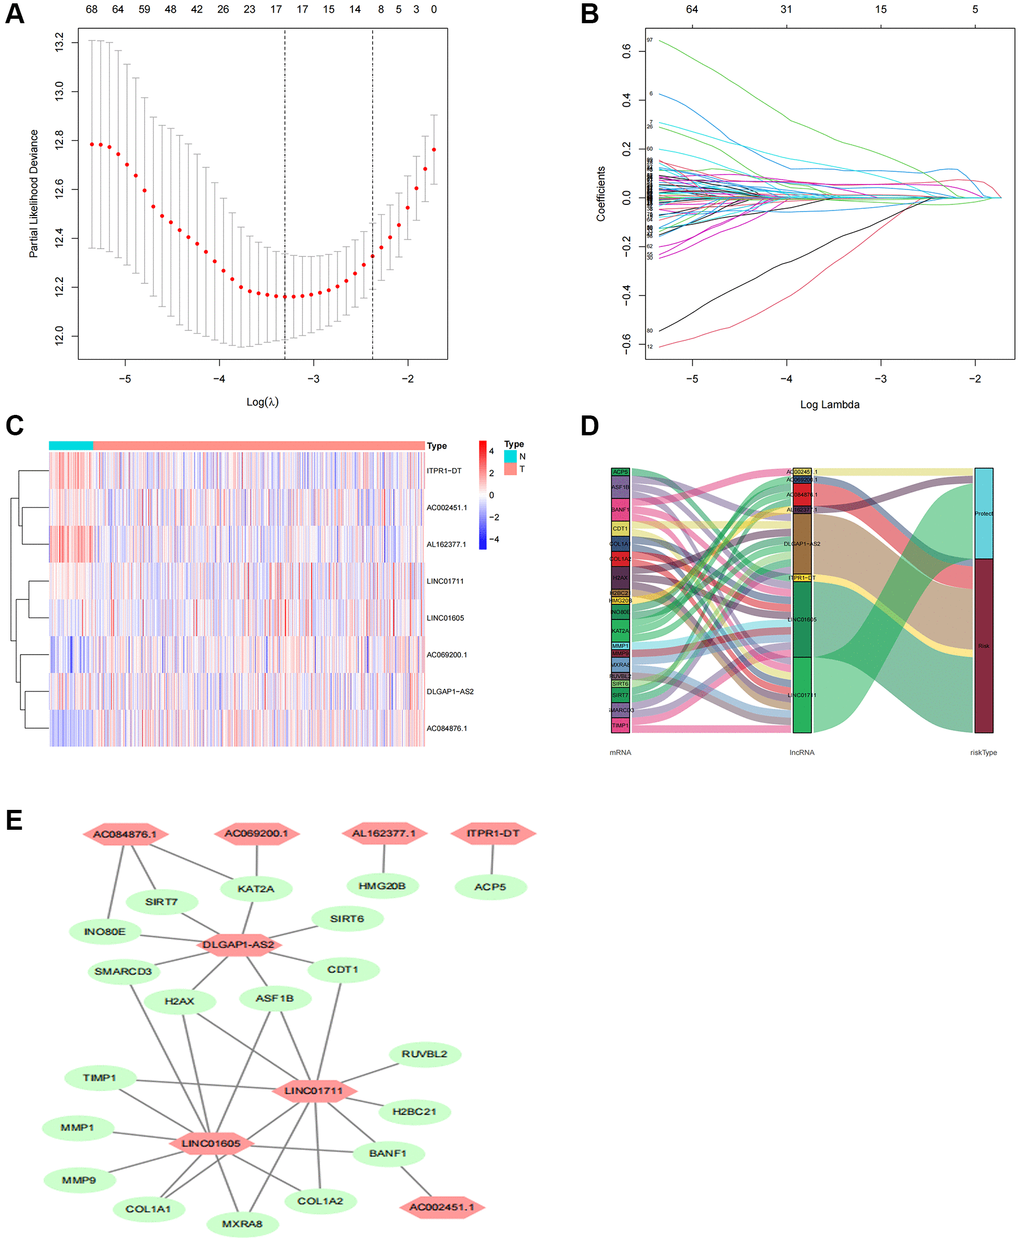 Screening, expression levels, and lncRNA-mRNA networks of eight TR-related lncRNAs in predicted signals. (A) Ten-fold cross-validation error rate plots. (B) LASSO coefficient profiles of TR-related lncRNAs. (C) Expression levels of eight TR-related lncRNAs in ccRCC and normal tissues. (D) Co-expression networks of prognostic TR-related lncRNAs. (E) Multinomial plots of prognostic TR-related lncRNAs. Abbreviations: lncRNAs: long-chain non-coding; ccRCC: renal clear cell carcinoma.